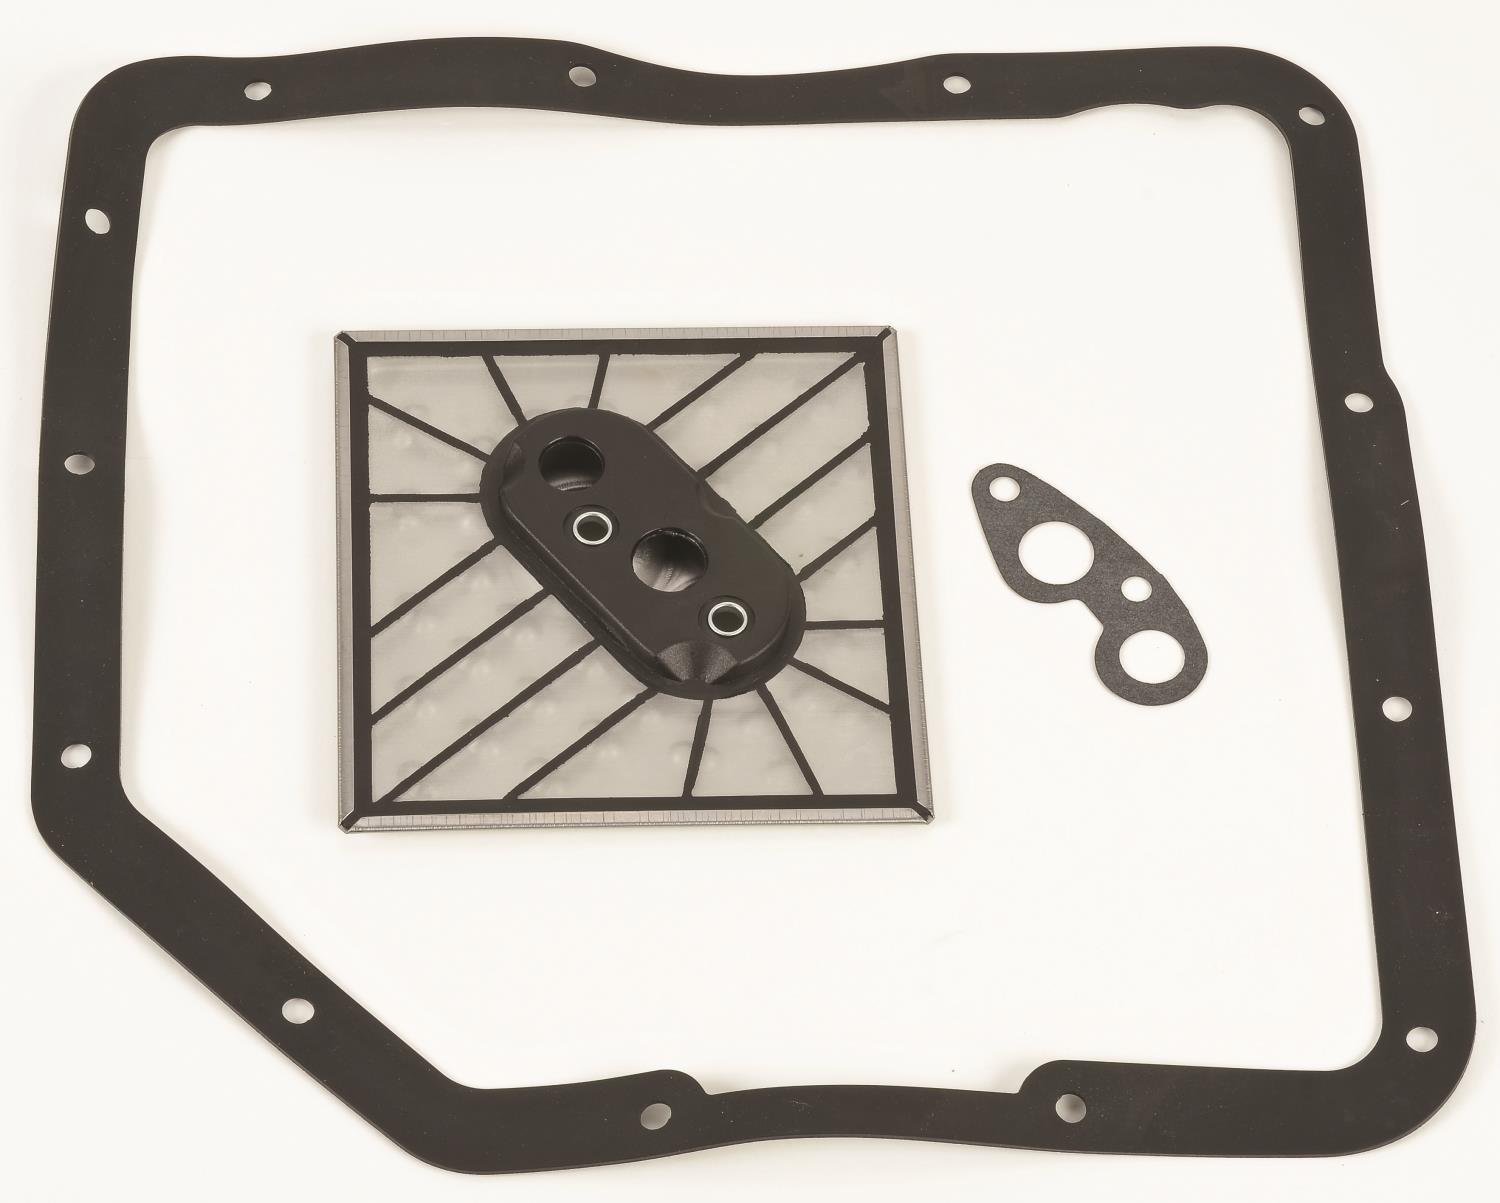 Transmission Filter and Gasket Kit for TH350 Chevy, BOP (including metric)